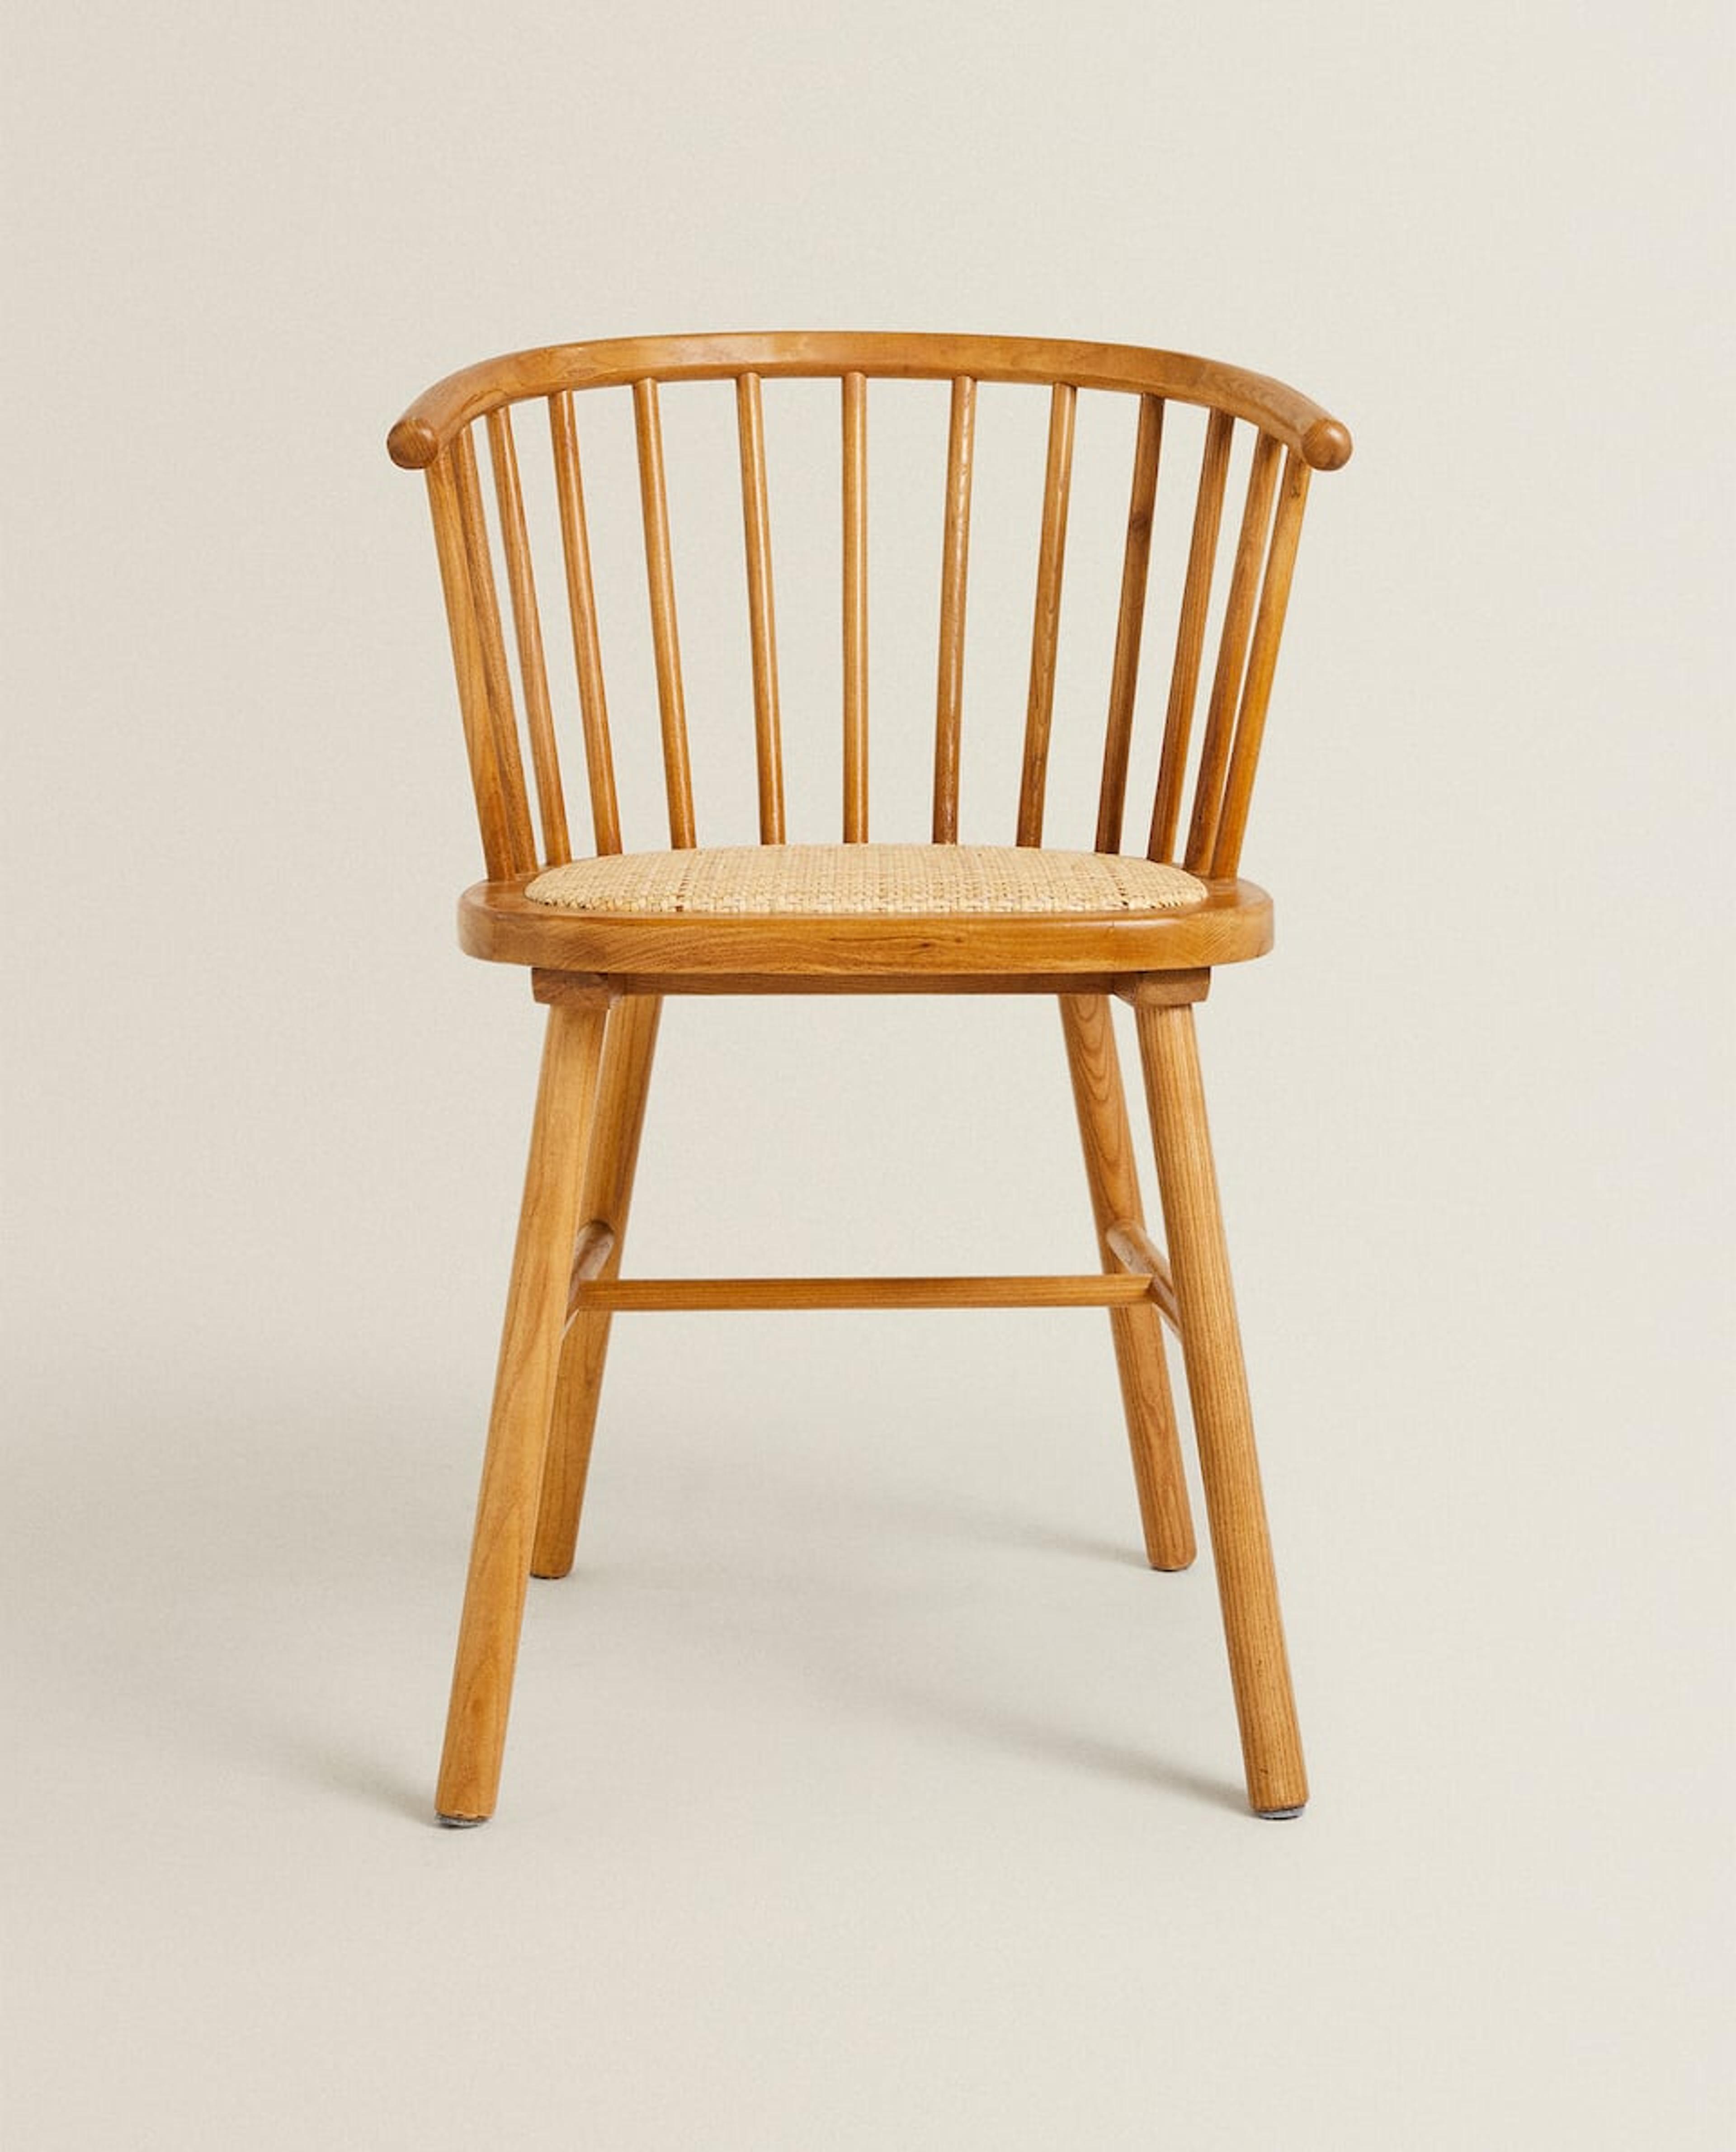 ASH WOOD CHAIR WITH RATTAN SEAT - SEE ALL - FURNITURE - LIVING ROOM | Zara Home United States of America